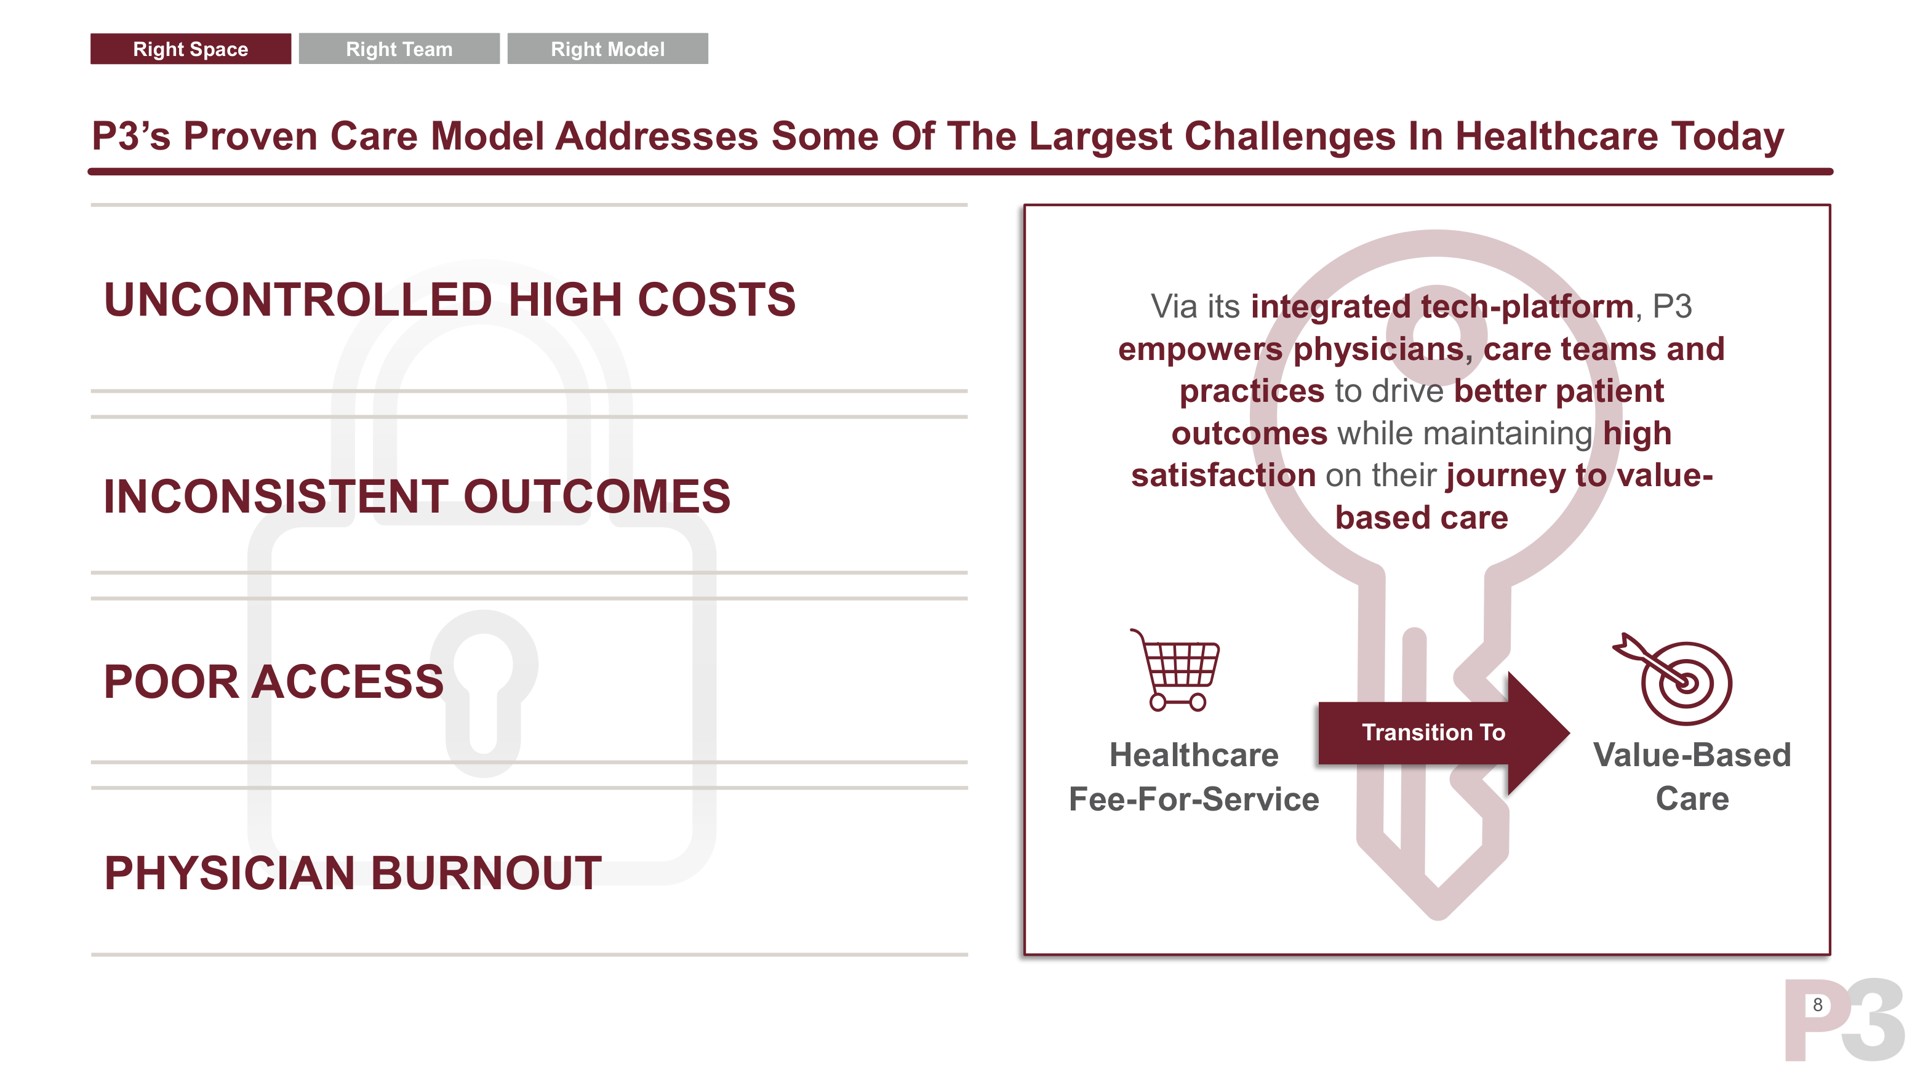 proven care model addresses some of the challenges in today uncontrolled high costs inconsistent outcomes via its integrated tech platform empowers physicians care teams and practices to drive better patient outcomes while maintaining high satisfaction on their journey to value based care poor access physician burnout fee for service value based care | P3 Health Partners